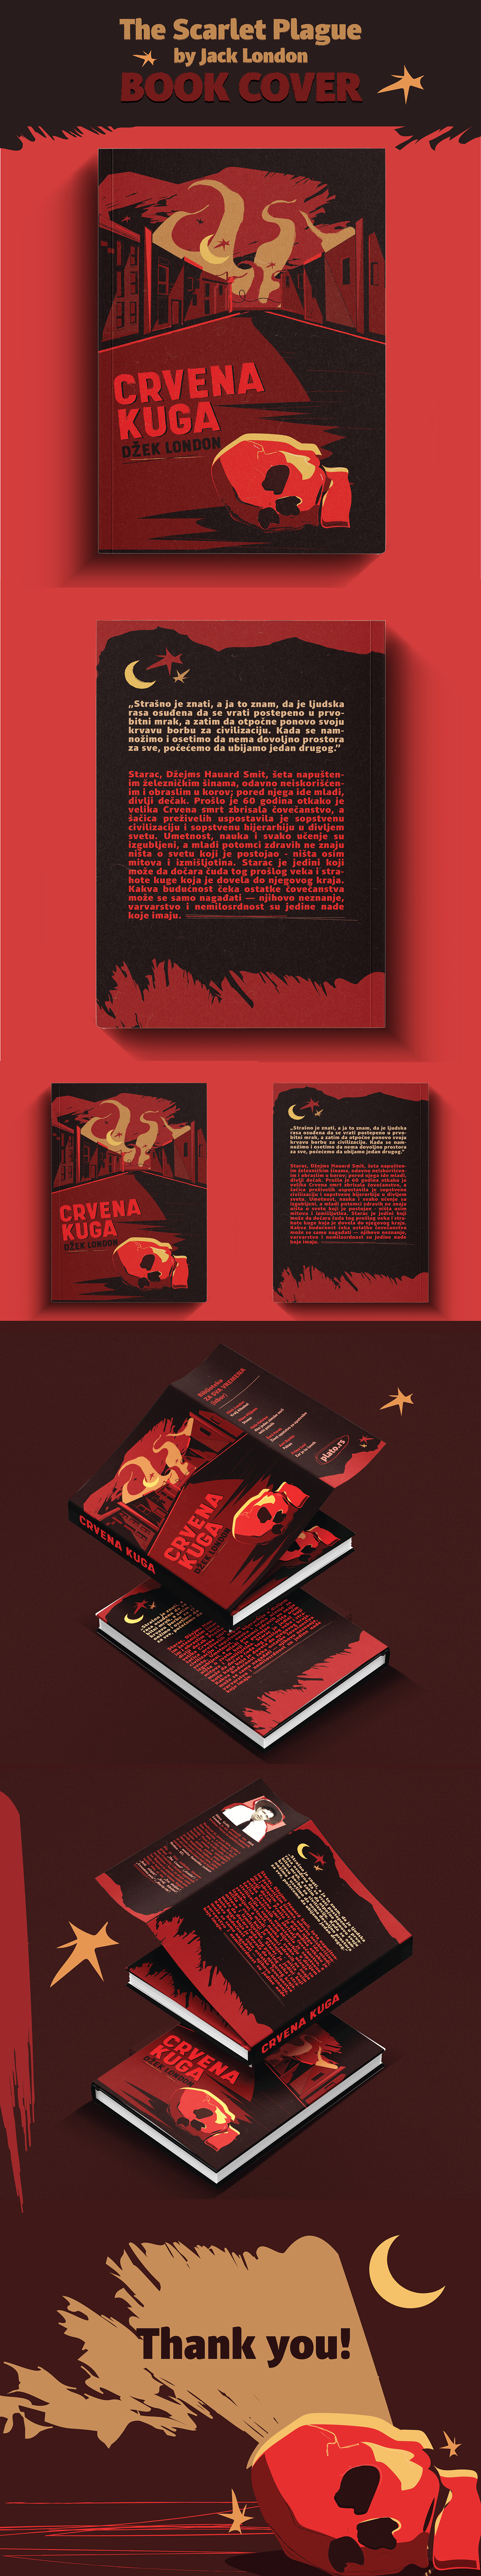 Apocalyptic book cover design featuring a red skull amidst flames and destruction, Scarlet Plague  